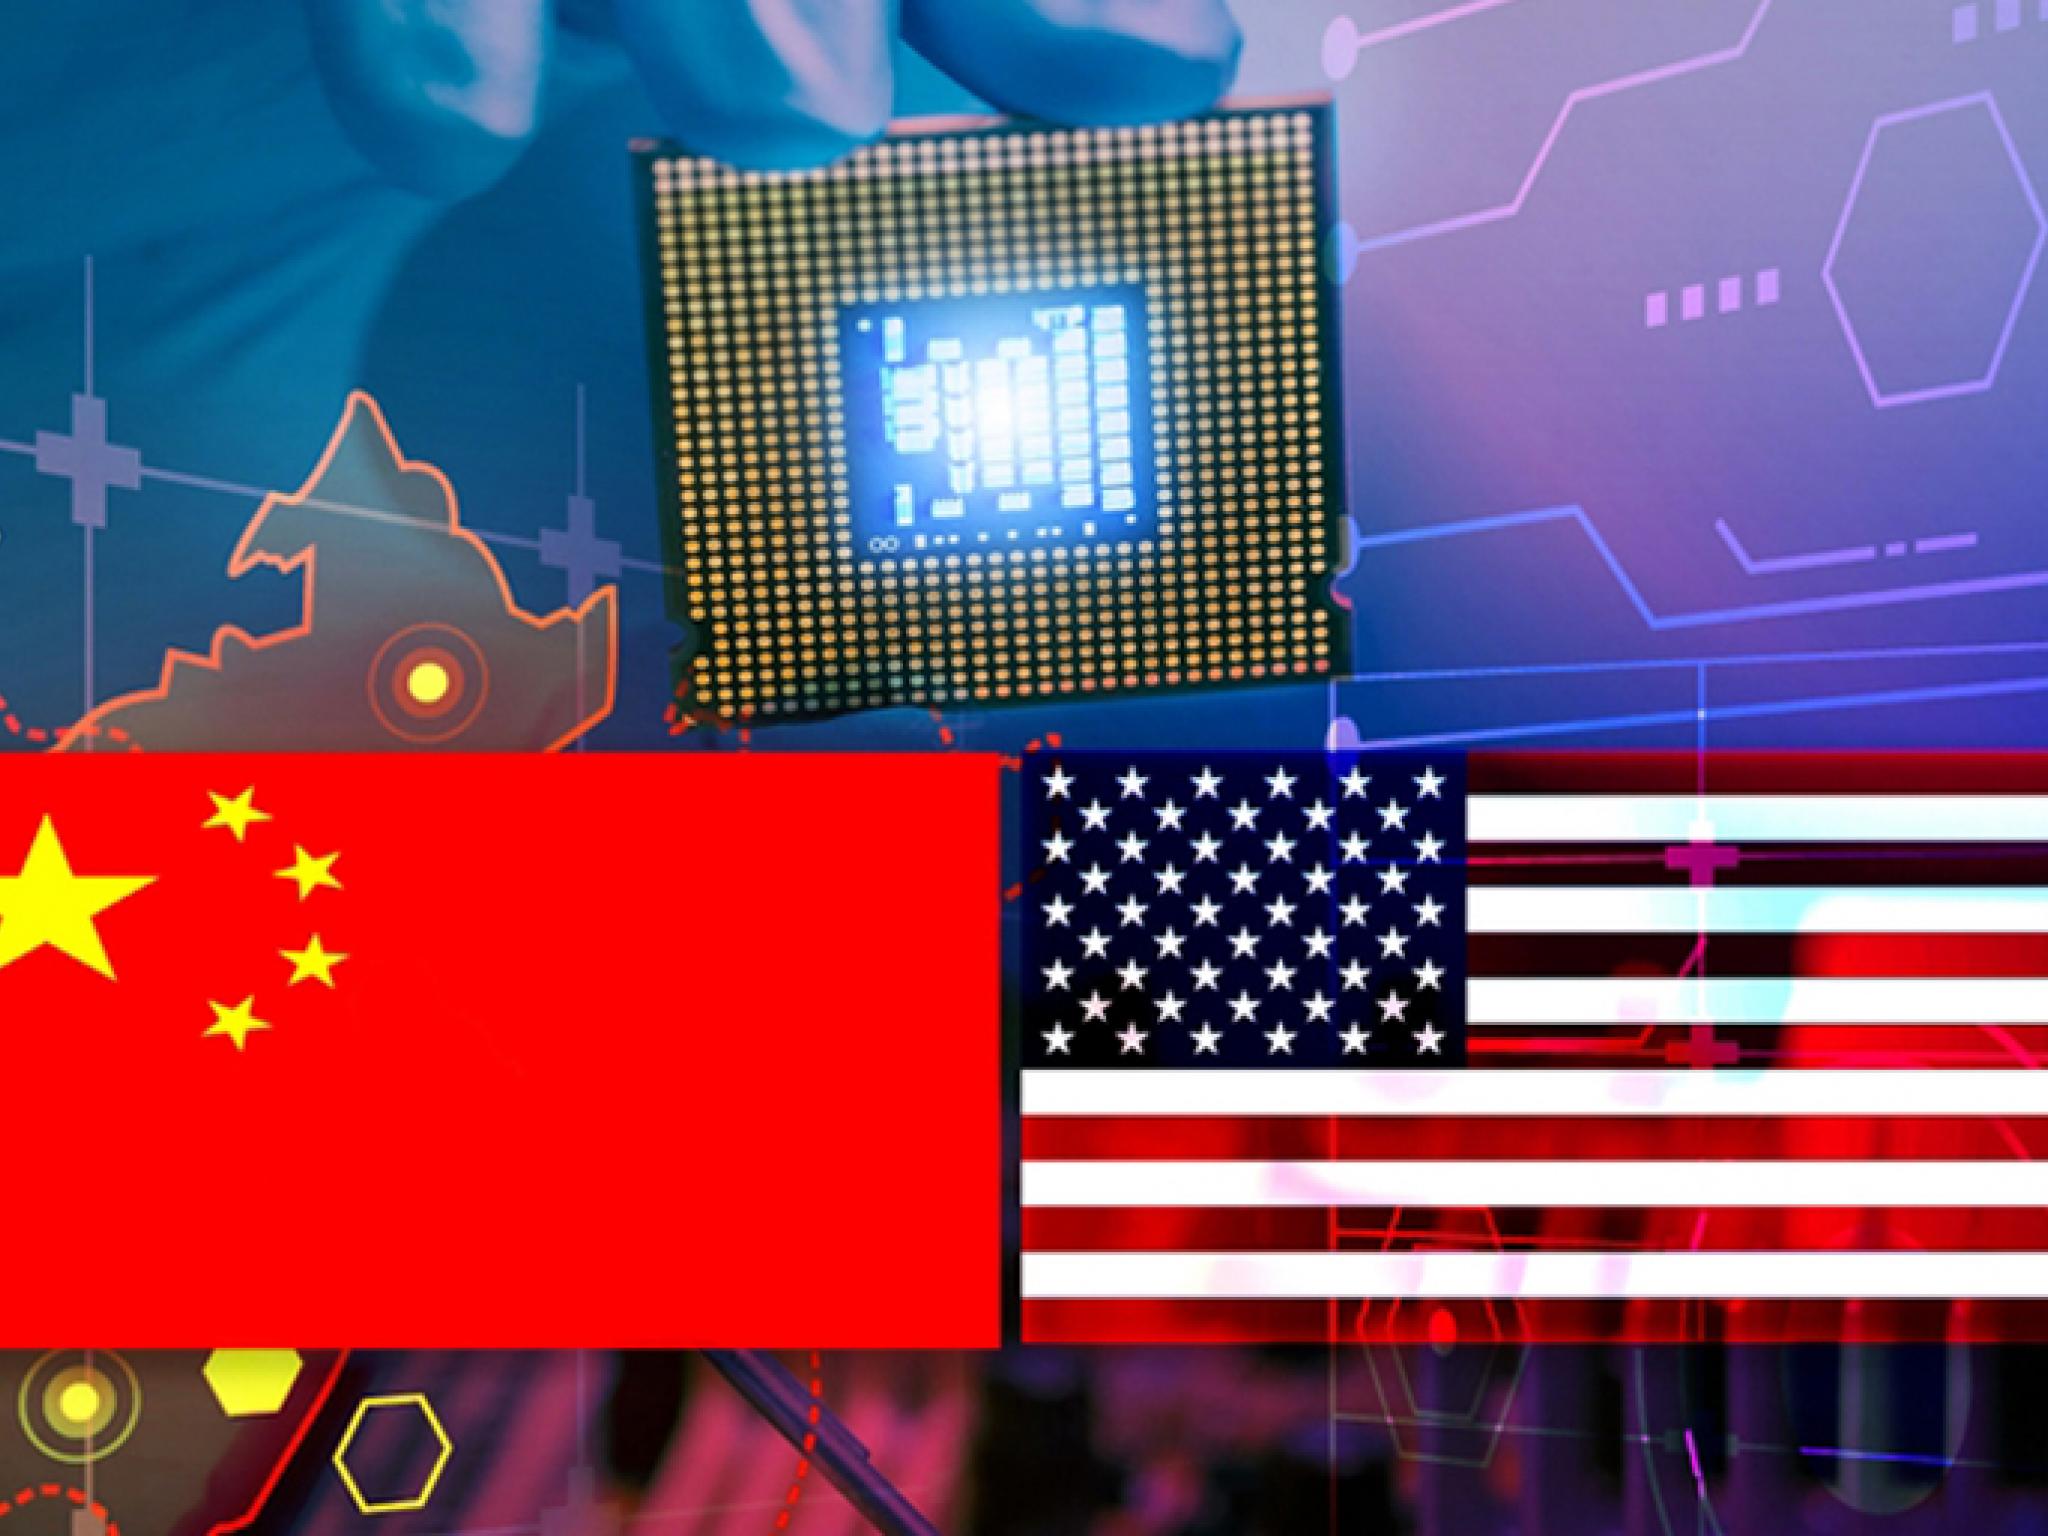  xi-jinpings-china-wants-to-delete-america-after-nvidia-others-forced-to-curb-high-end-chip-exports-to-beijing-but-are-biden-administrations-policies-waking-up-a-sleeping-lion 